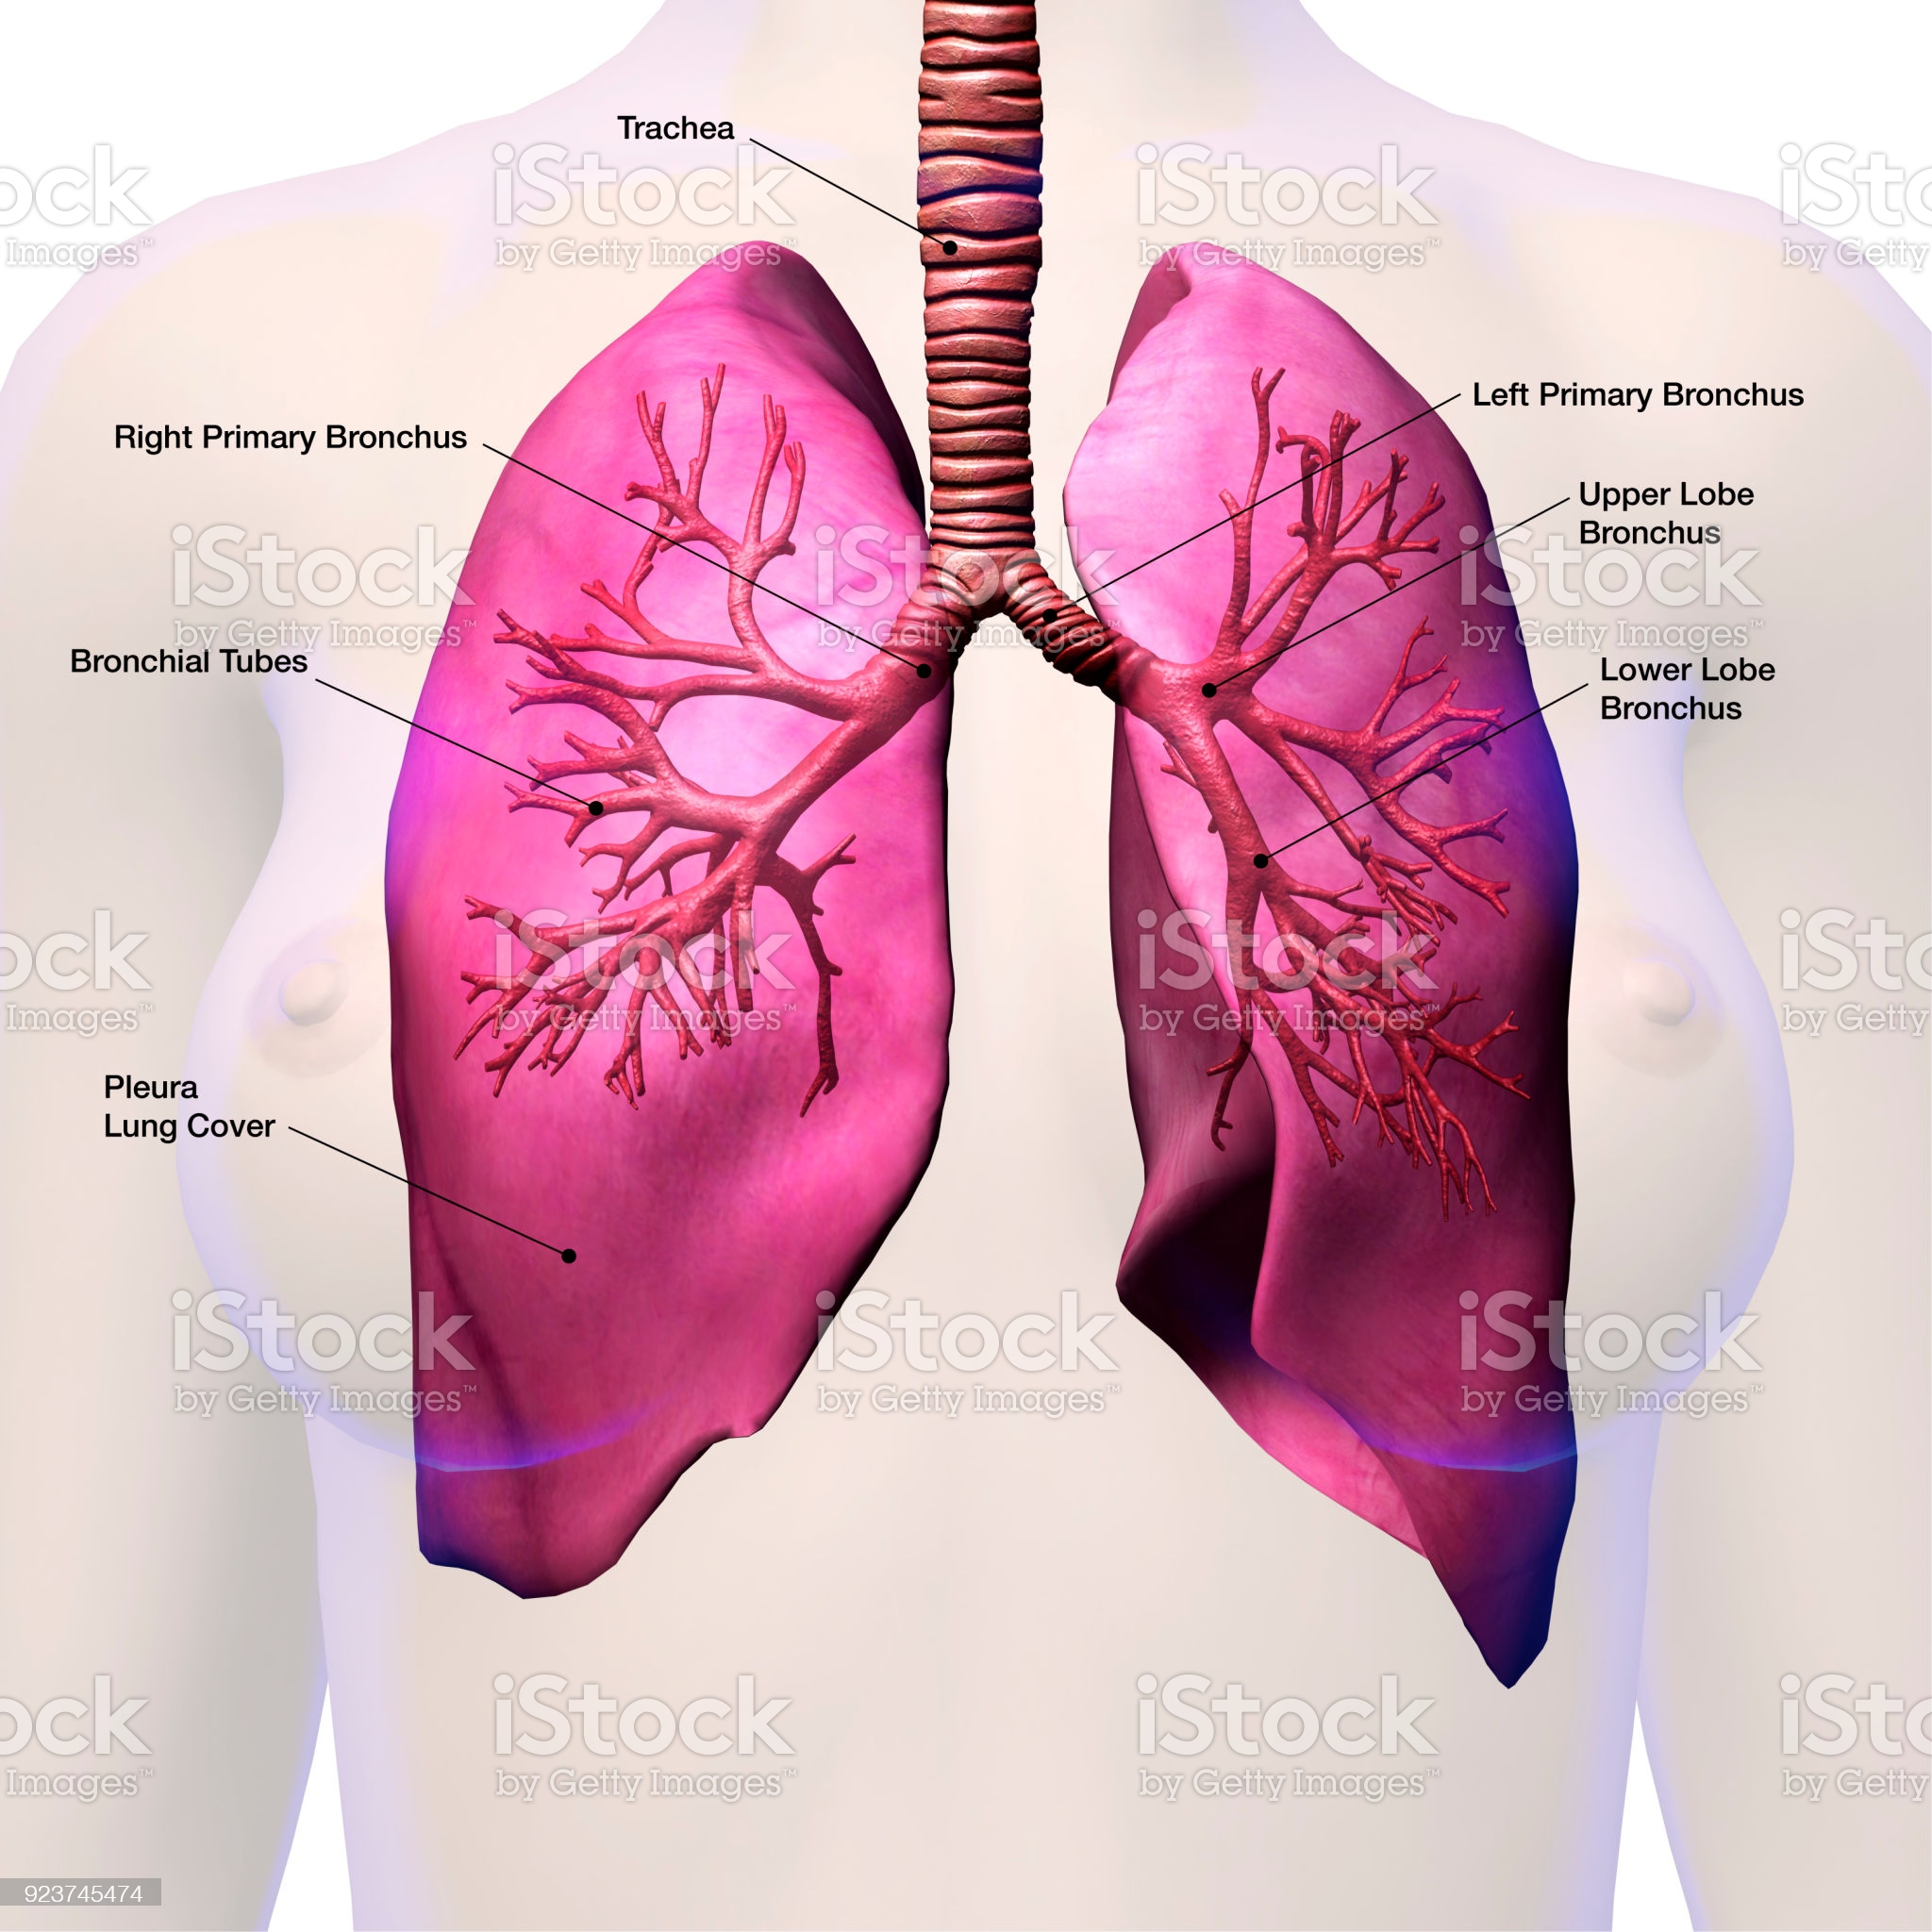 Bronchus and Lungs Labeled